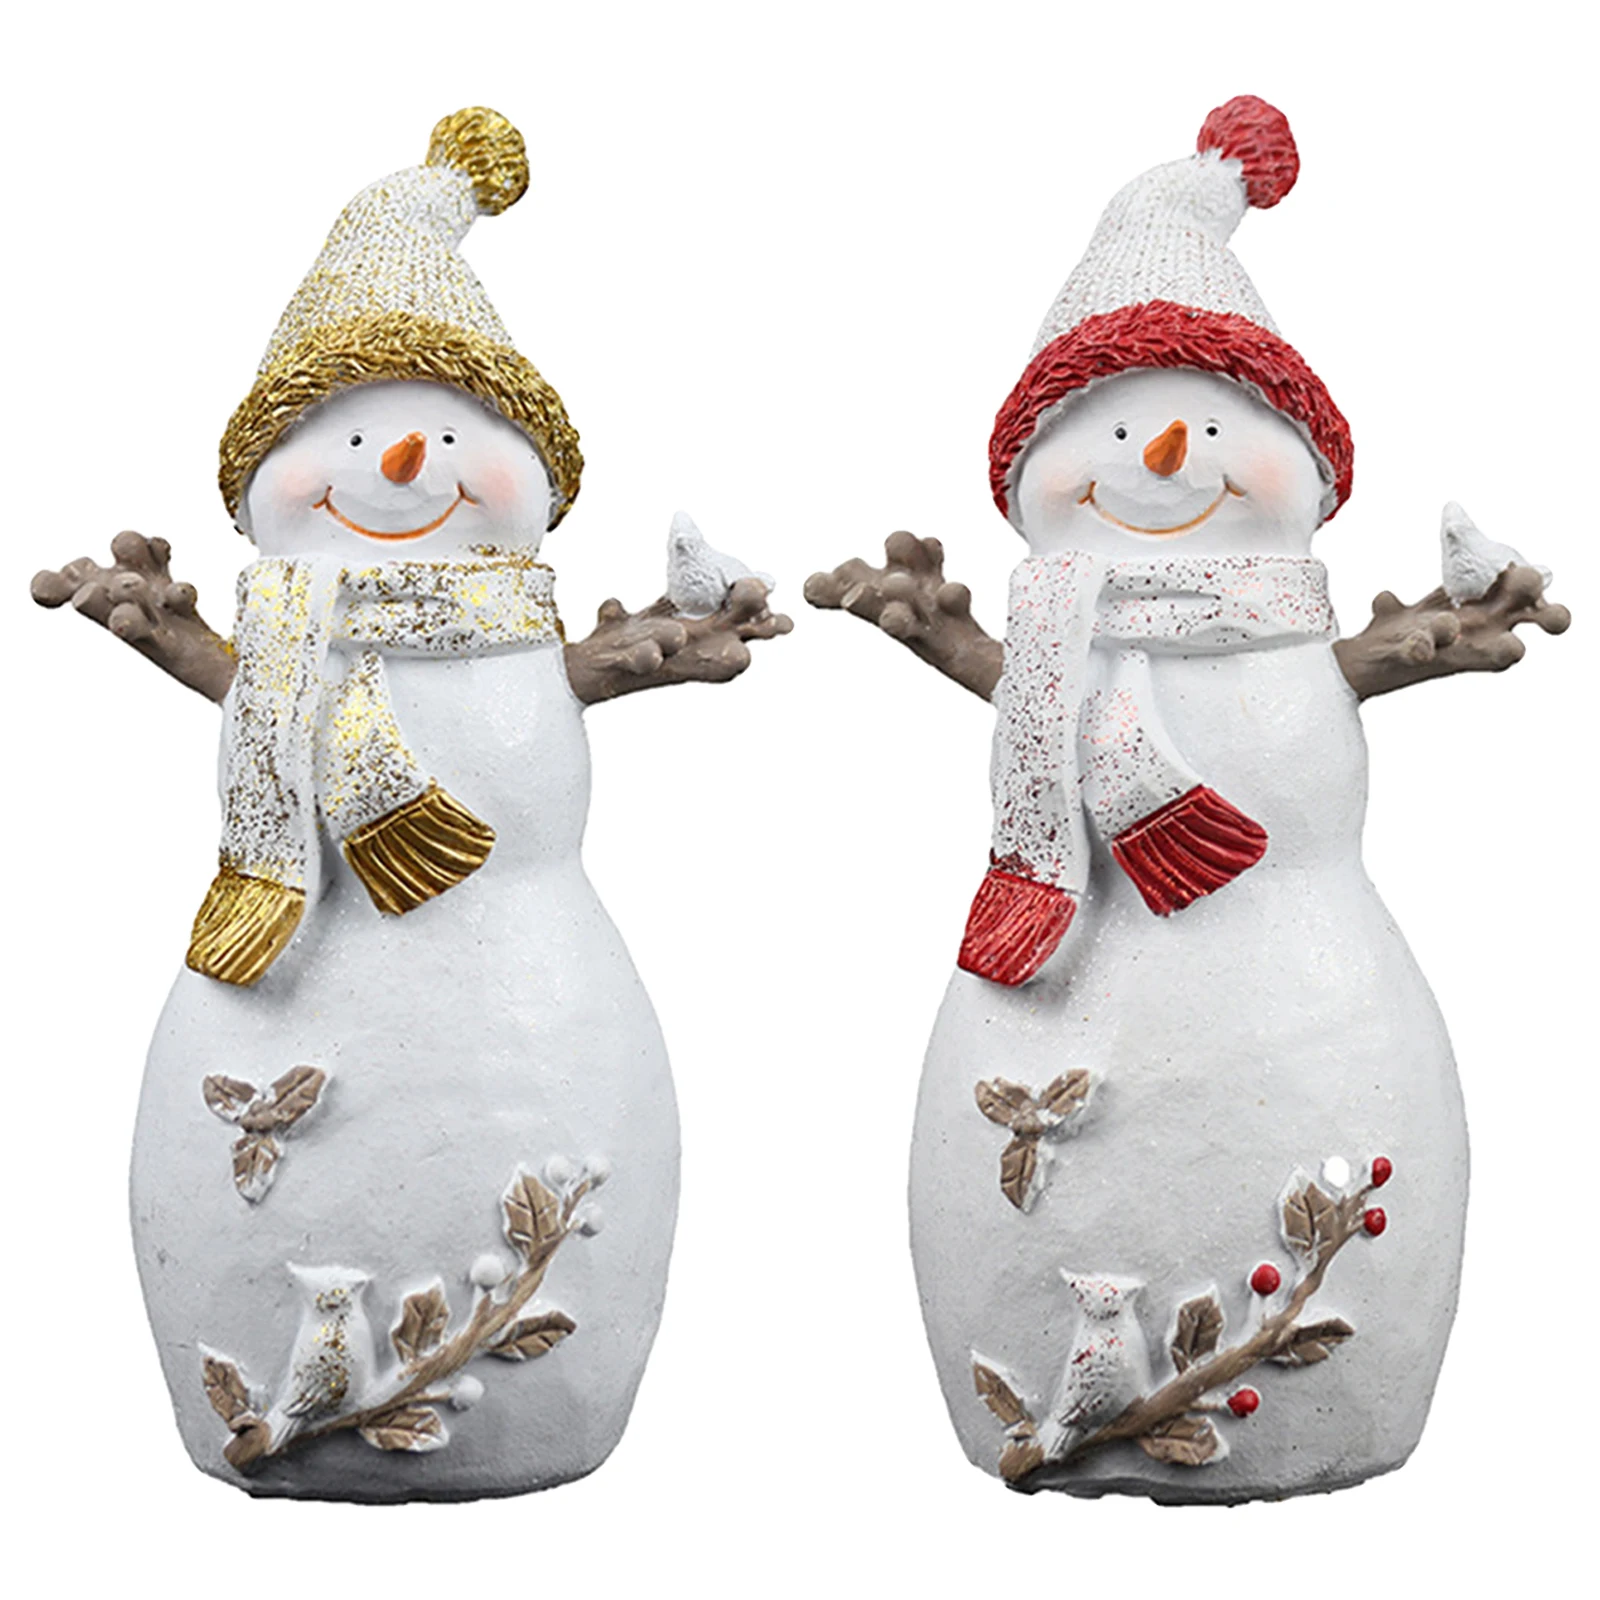 Hand-Painted Resin Snowman Figurine Desktop Ornaments Statue Wedding Birthday Gifts for Christmas Men Women Home Office